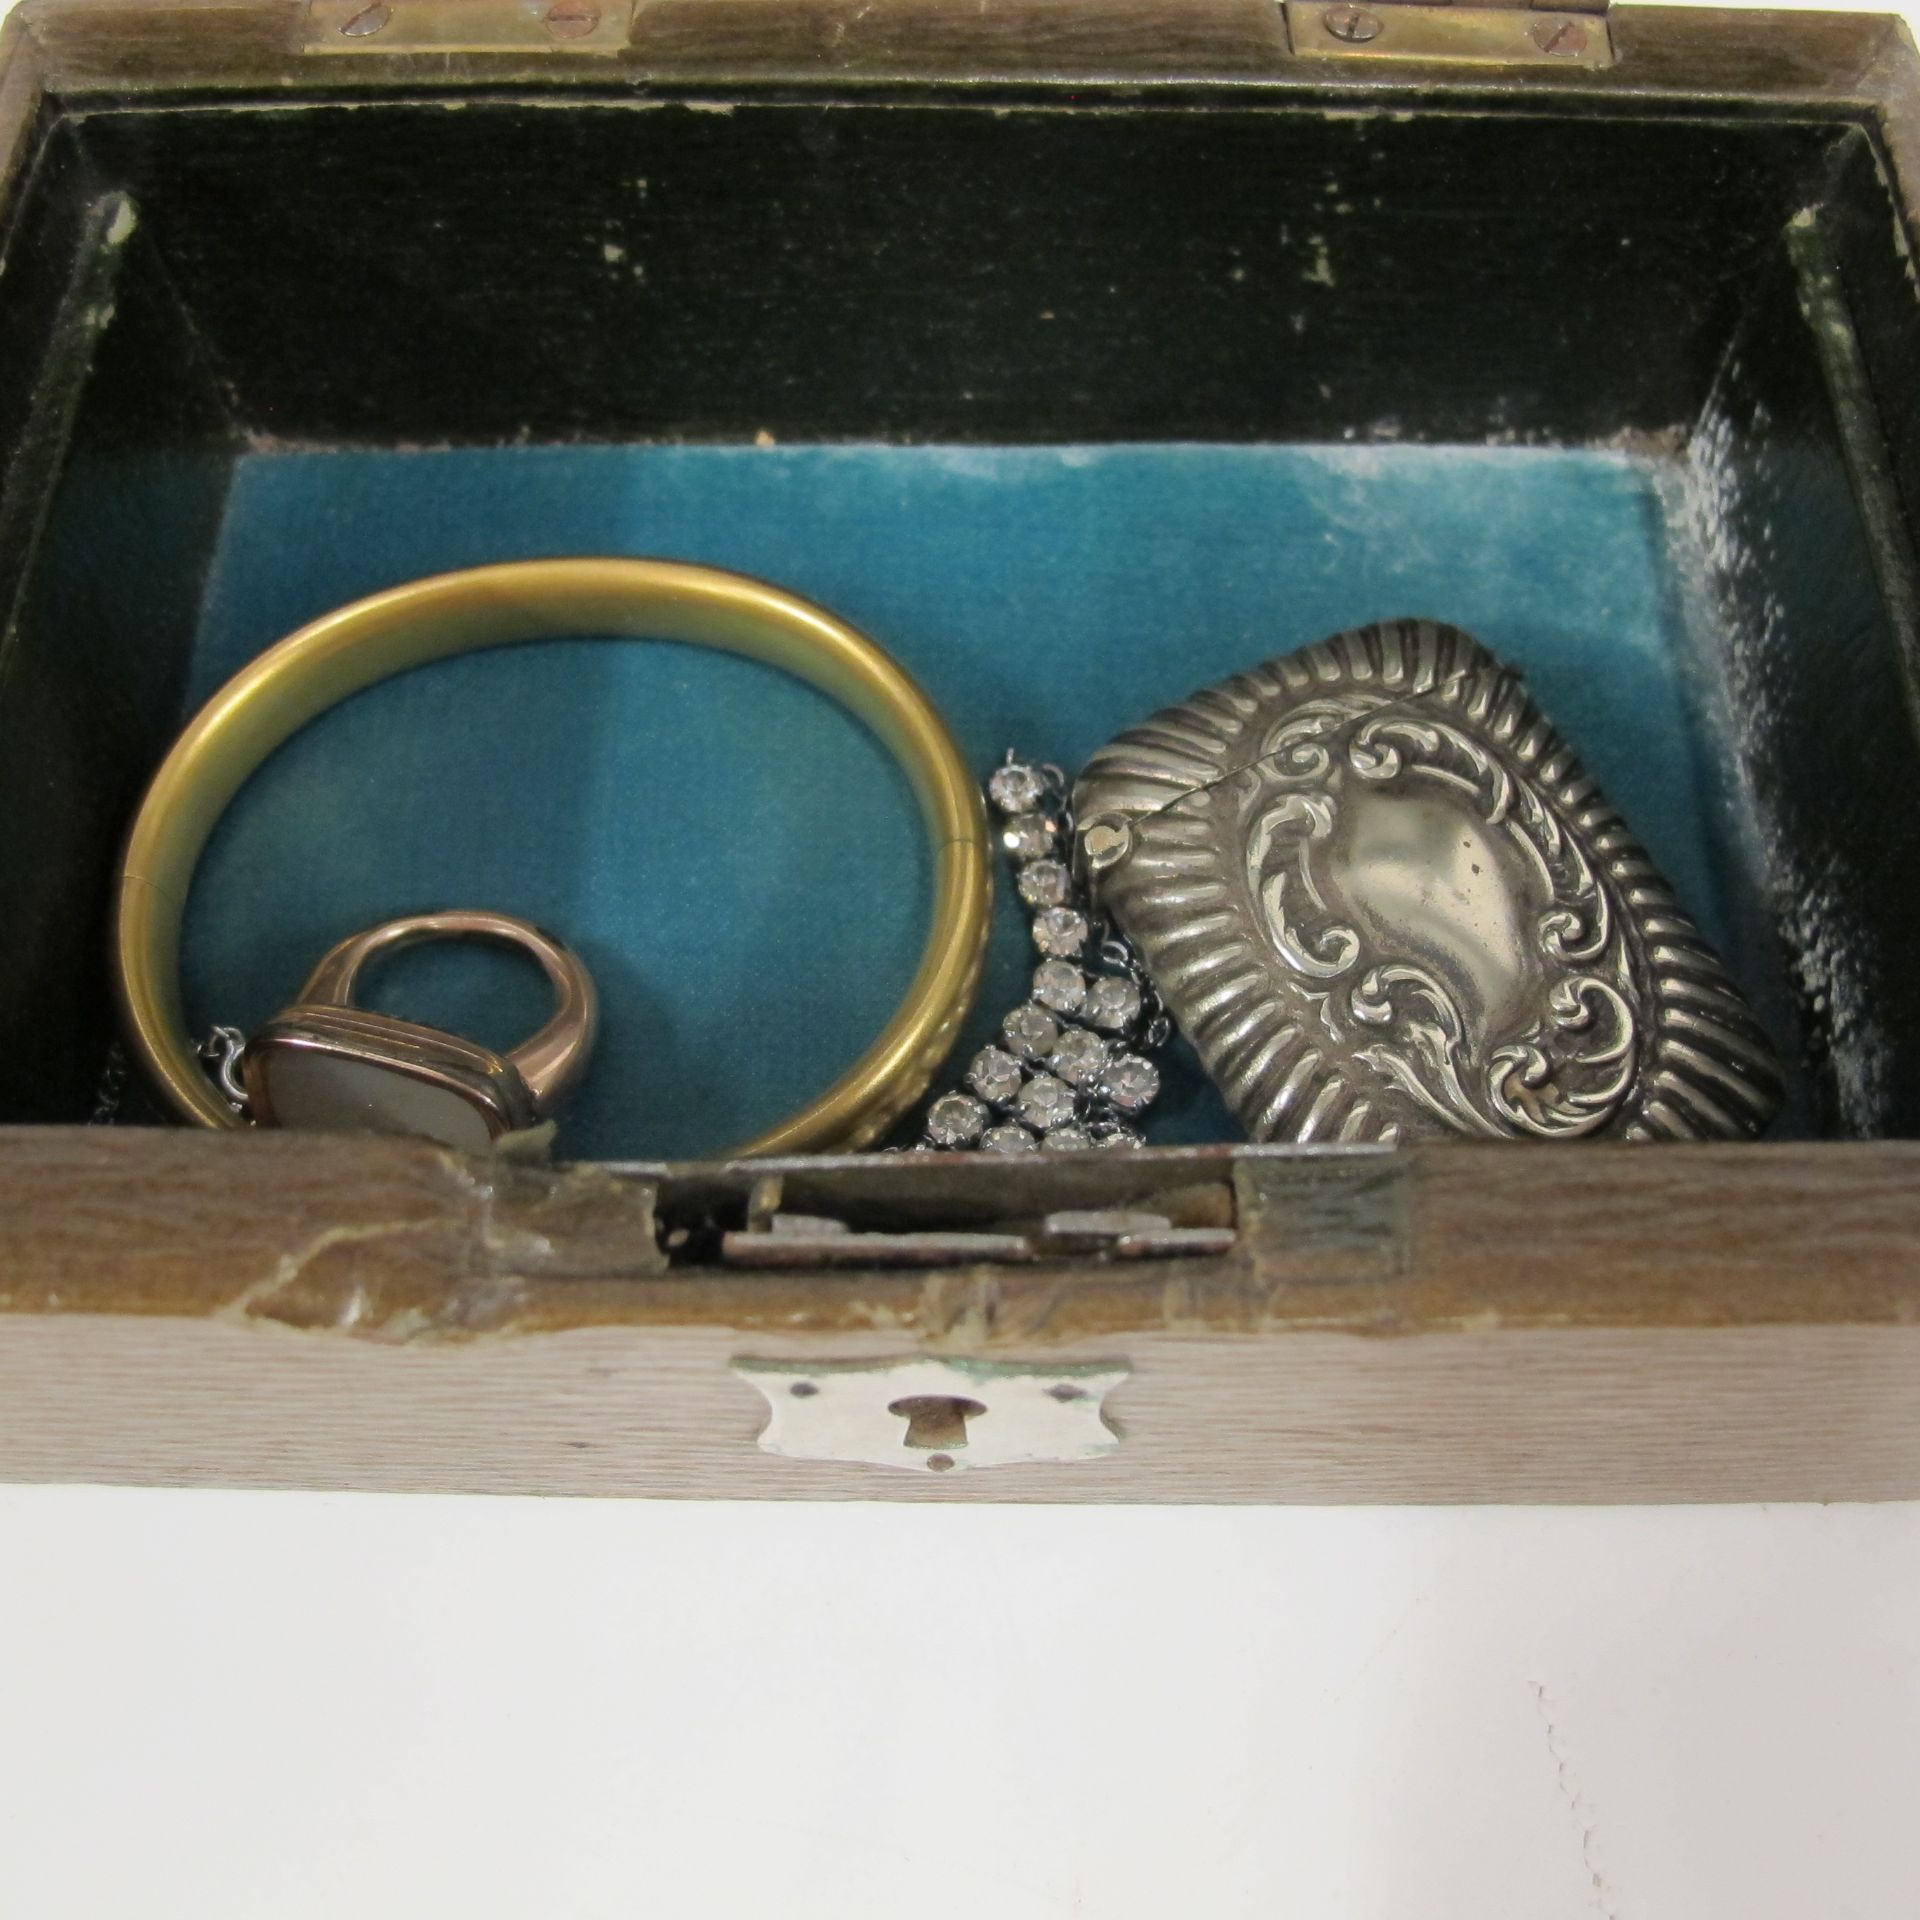 Vintage Jewellery Box including antique and vintage items - some gold and silver (est £150-£300) - Image 2 of 3